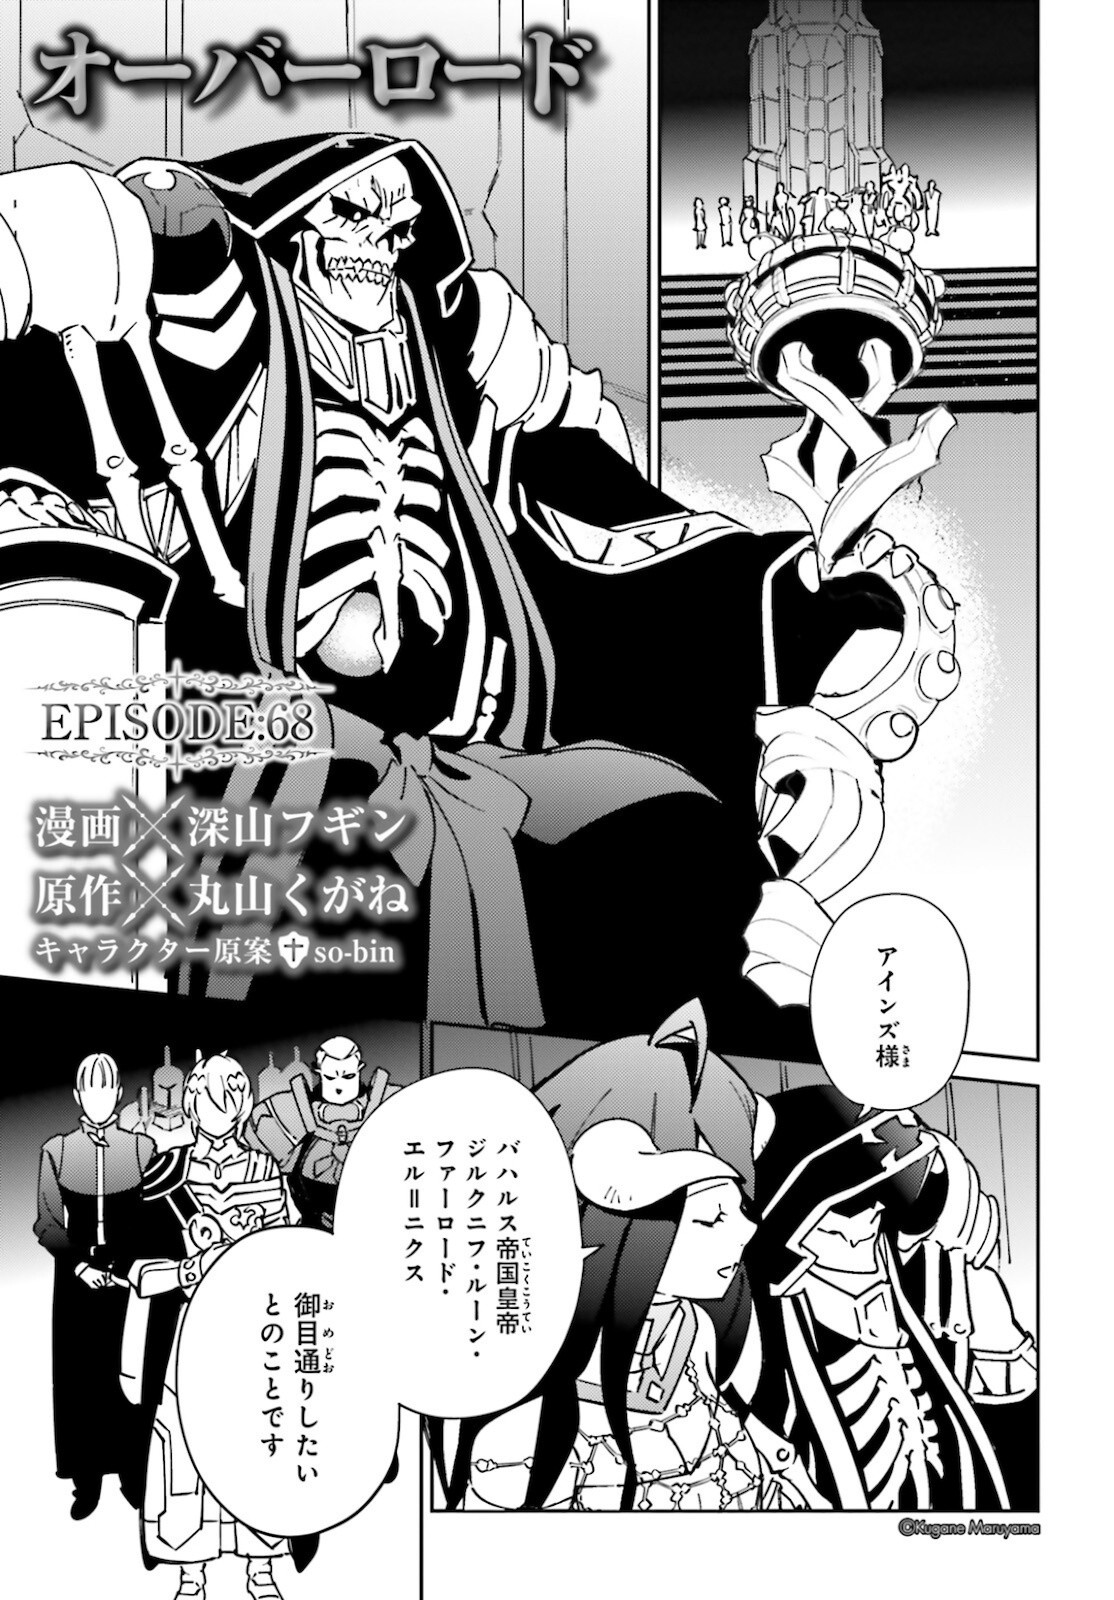 Overlord - Chapter 68 - Page 1